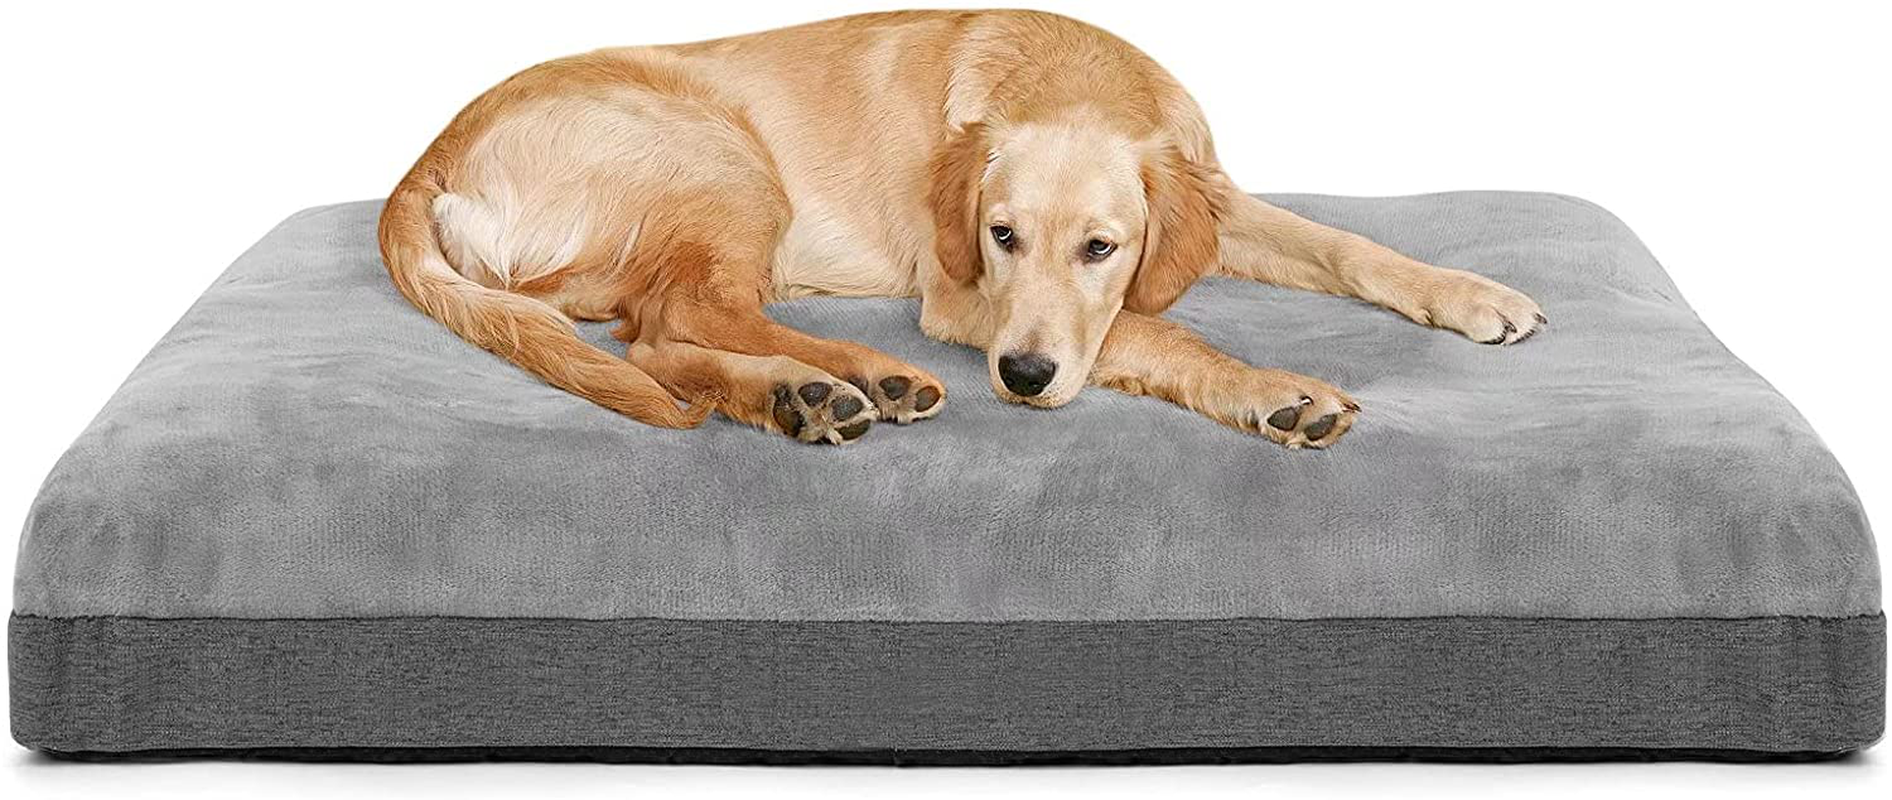 Orthopedic Foam Large Dog Bed, Extra Thicken Pet Bolster Mattress(5.5-6 Inches), Washable Dog Bed with Removable Cover, Super Soft & anti Slip Bottom for Medium, Large and Extra Large Dogs